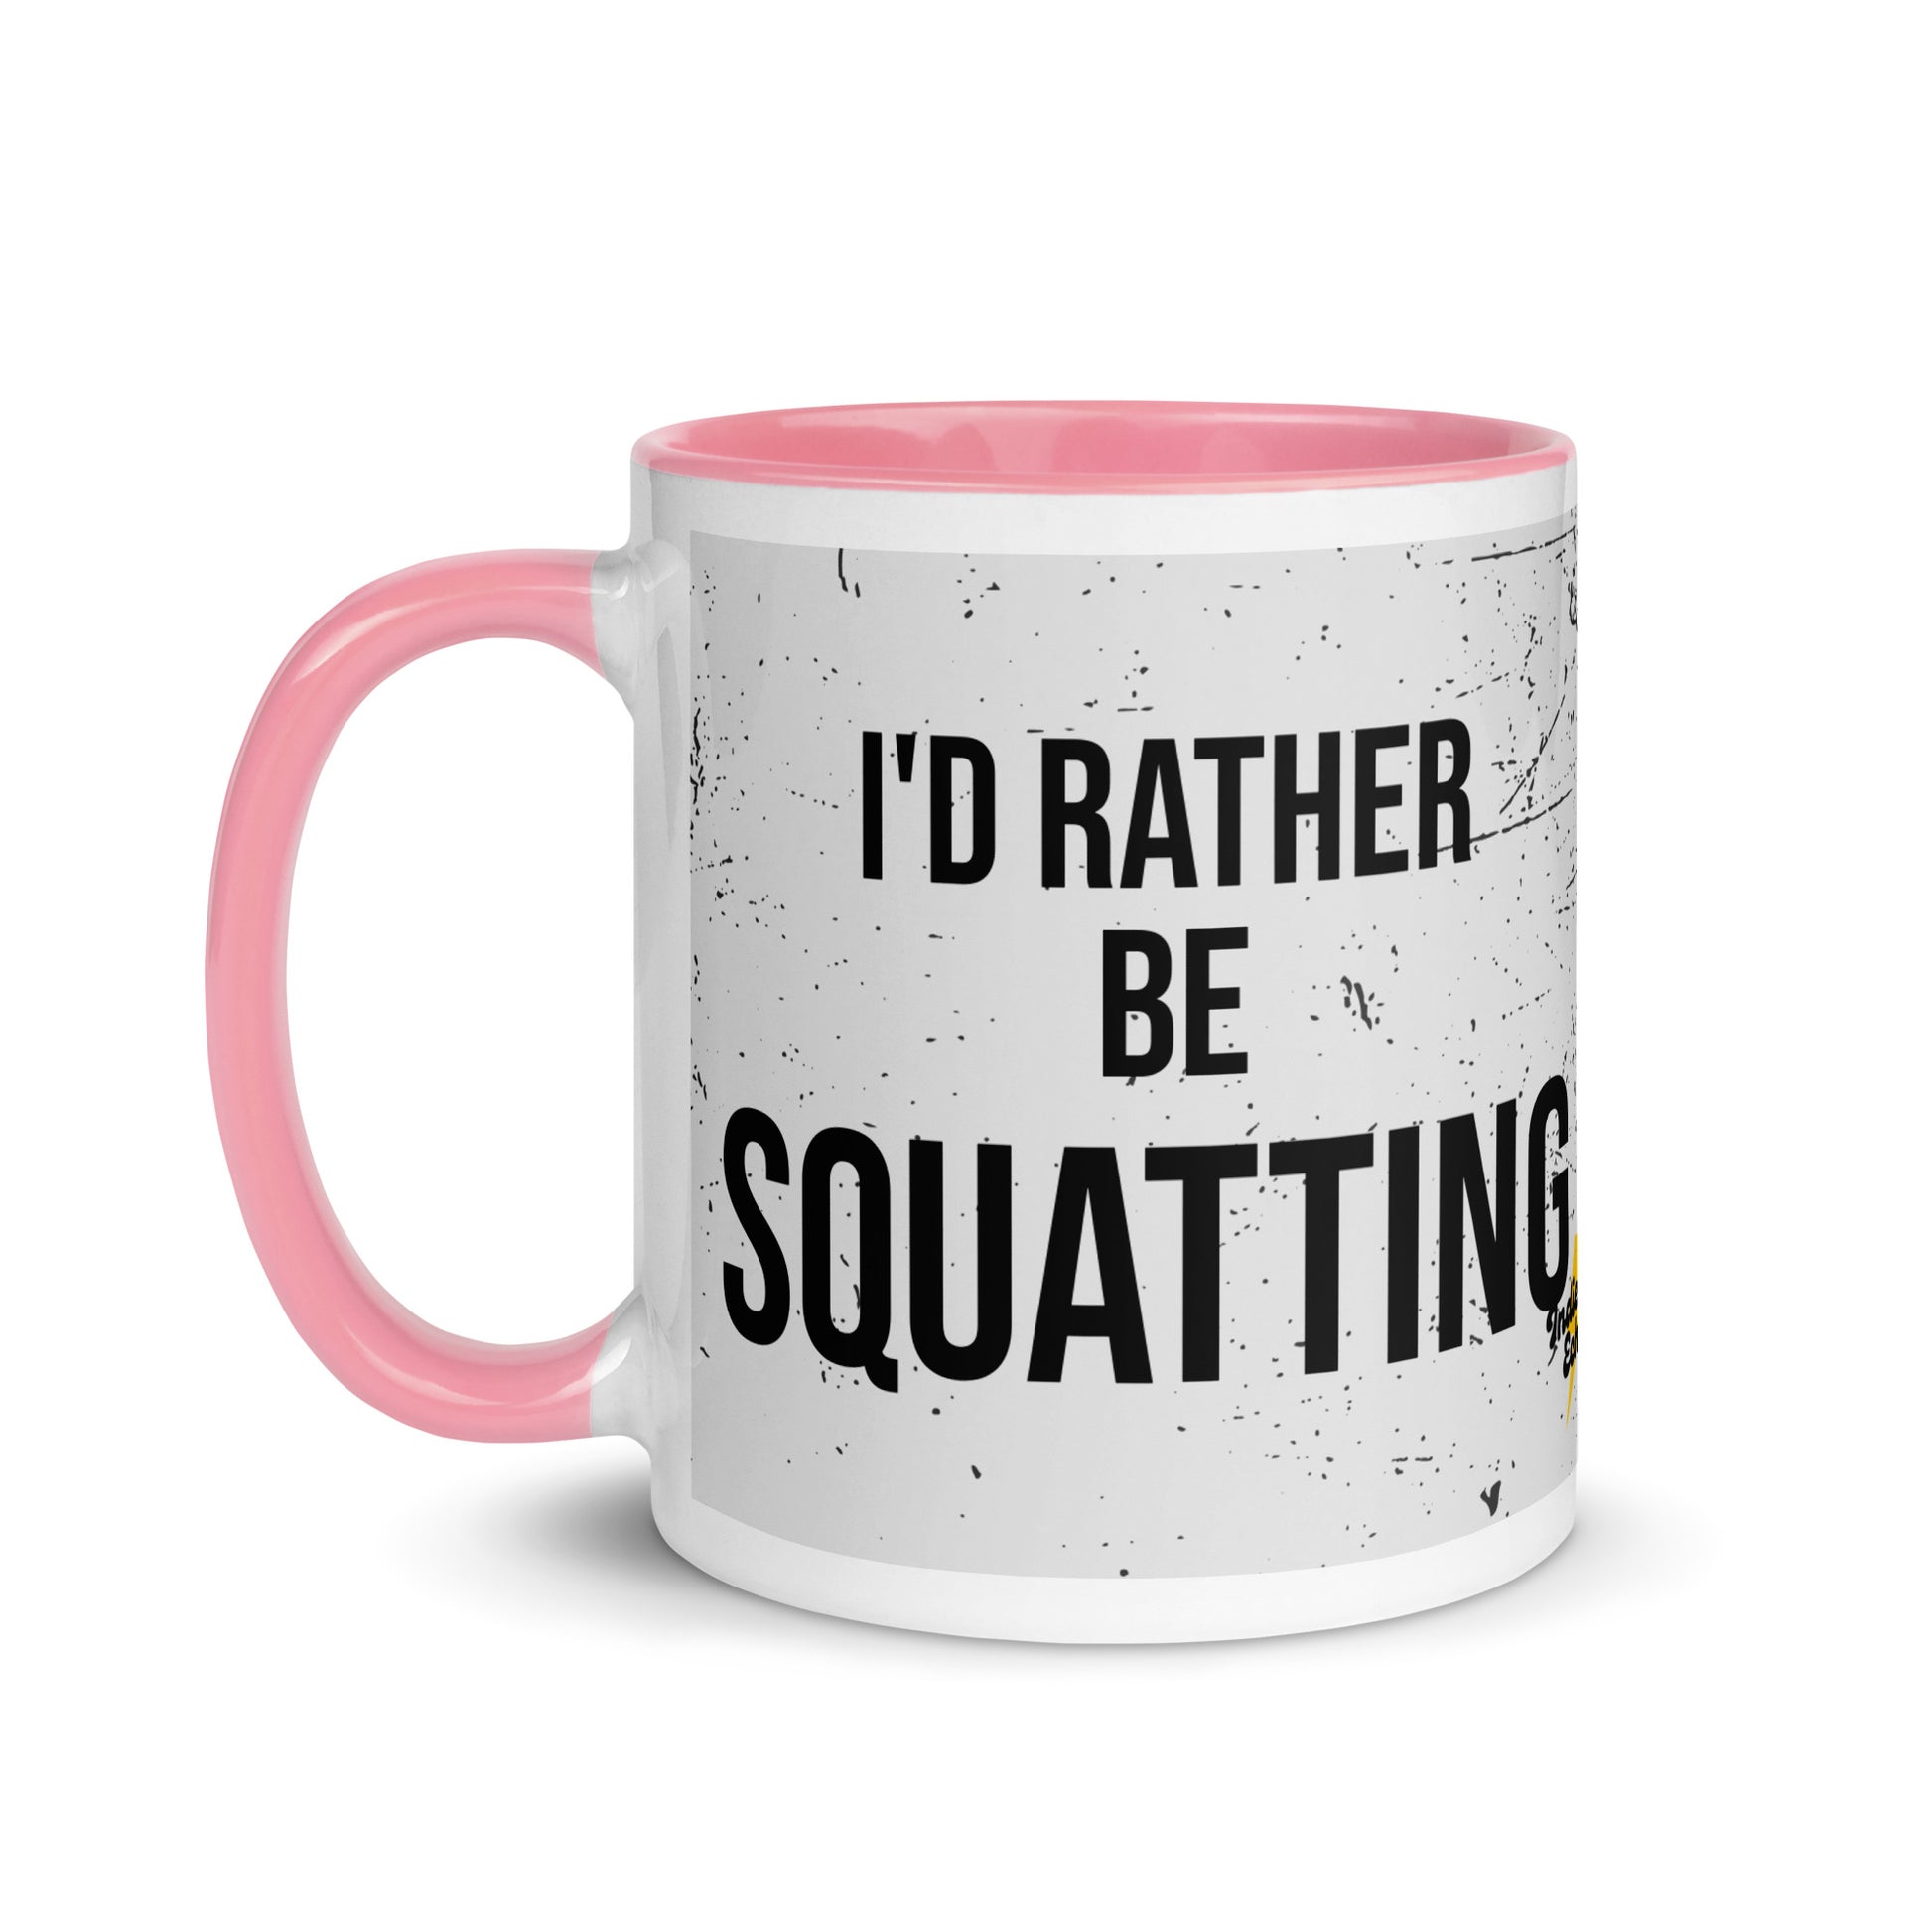 Pink handled mug with I'd rather be squatting written on it, across a grey splatter background. A gift for someone who loves the gym.